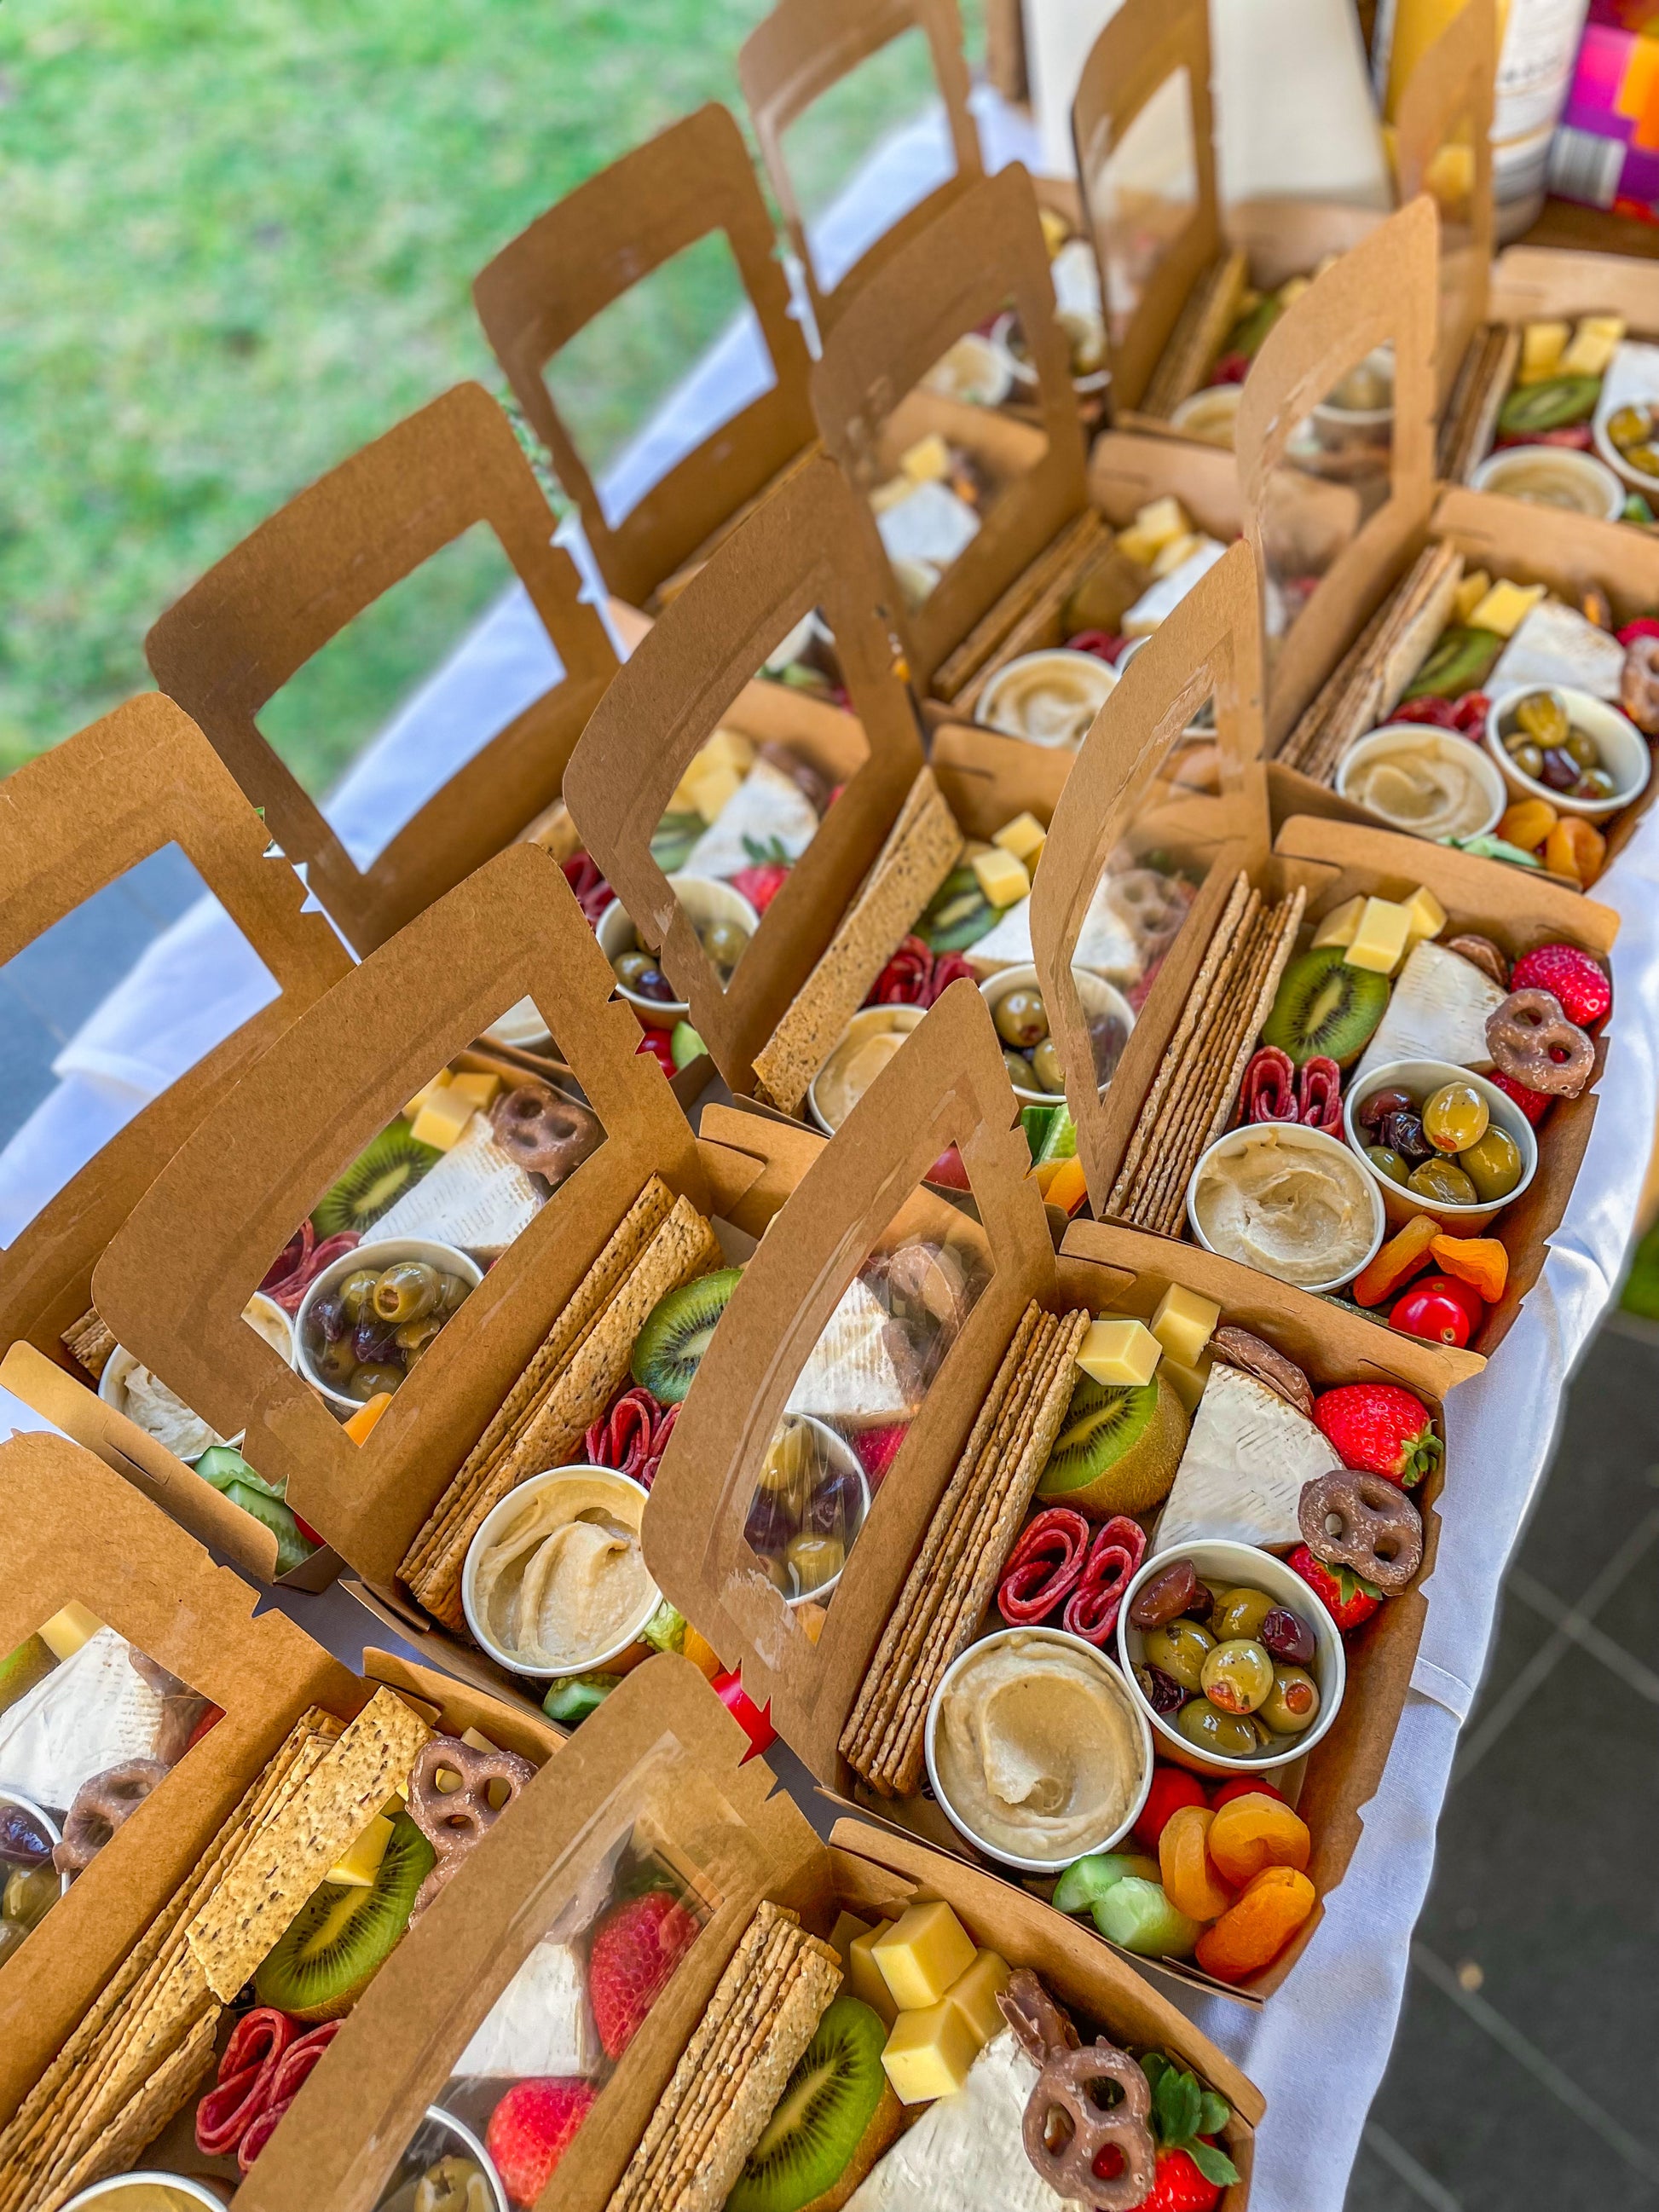 office catering sydney